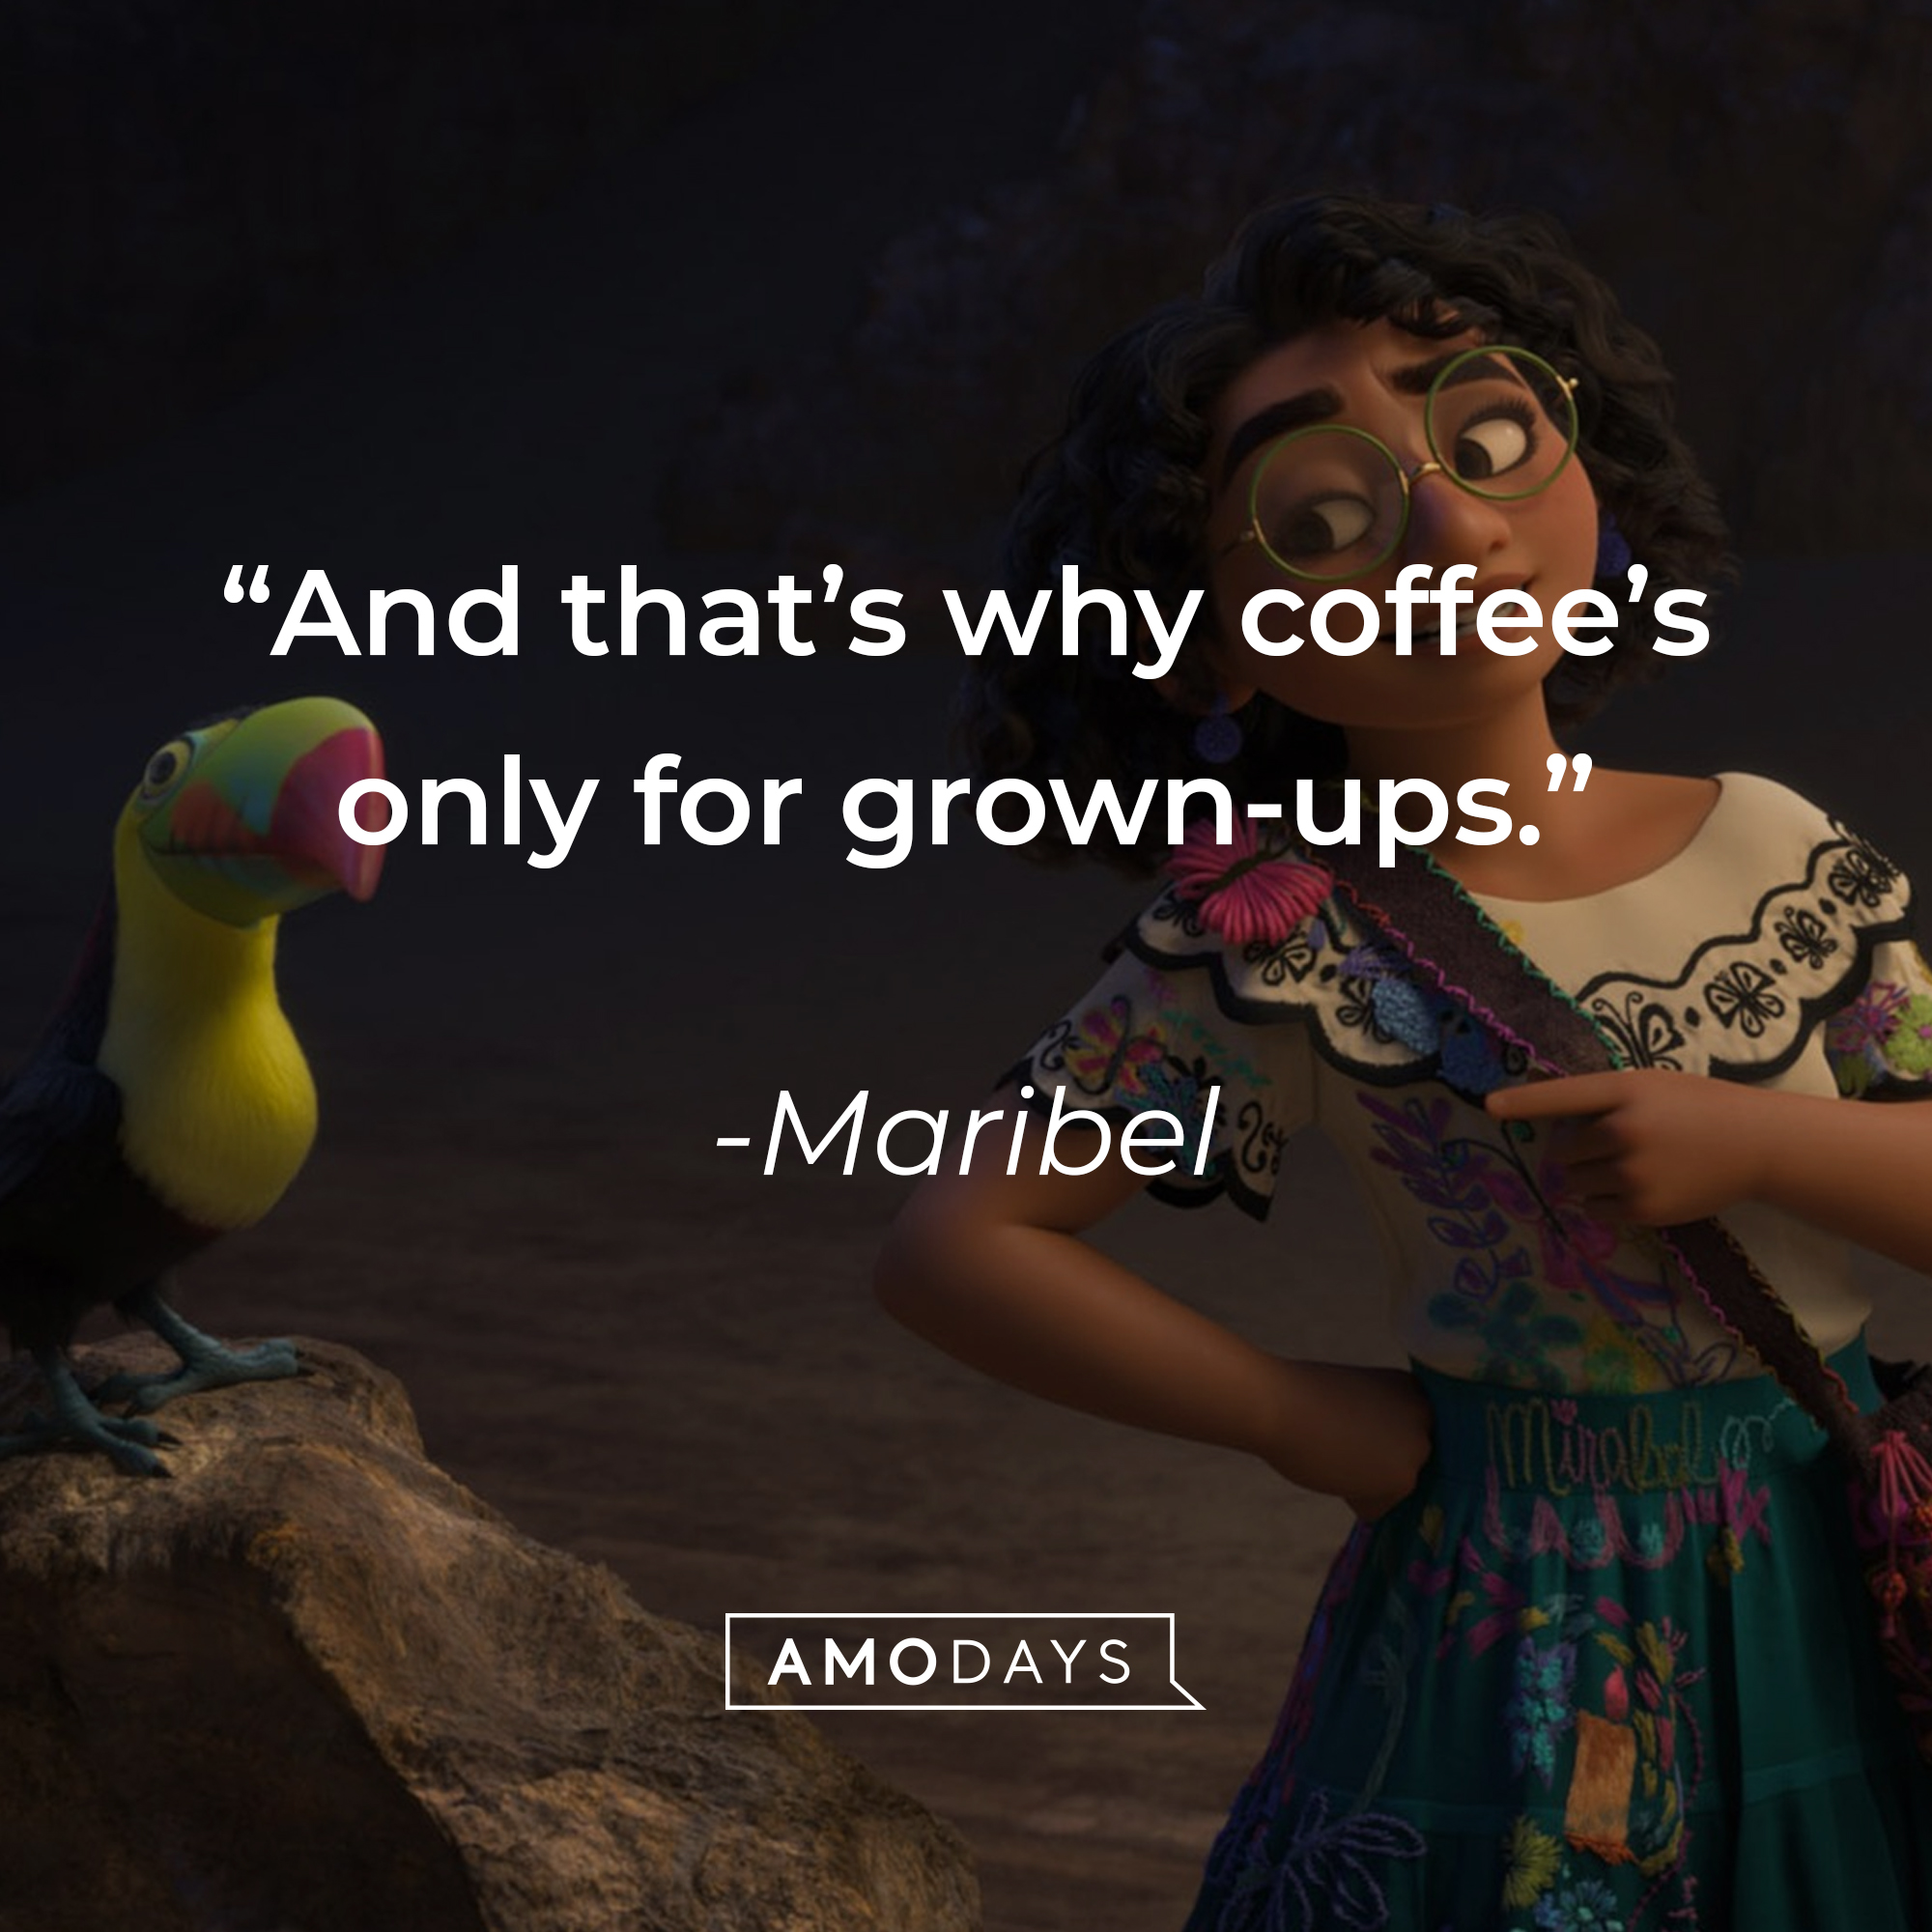 Maribel's quote: "And that’s why coffee’s only for grown-ups." | Source: facebook.com/EncantoMovie